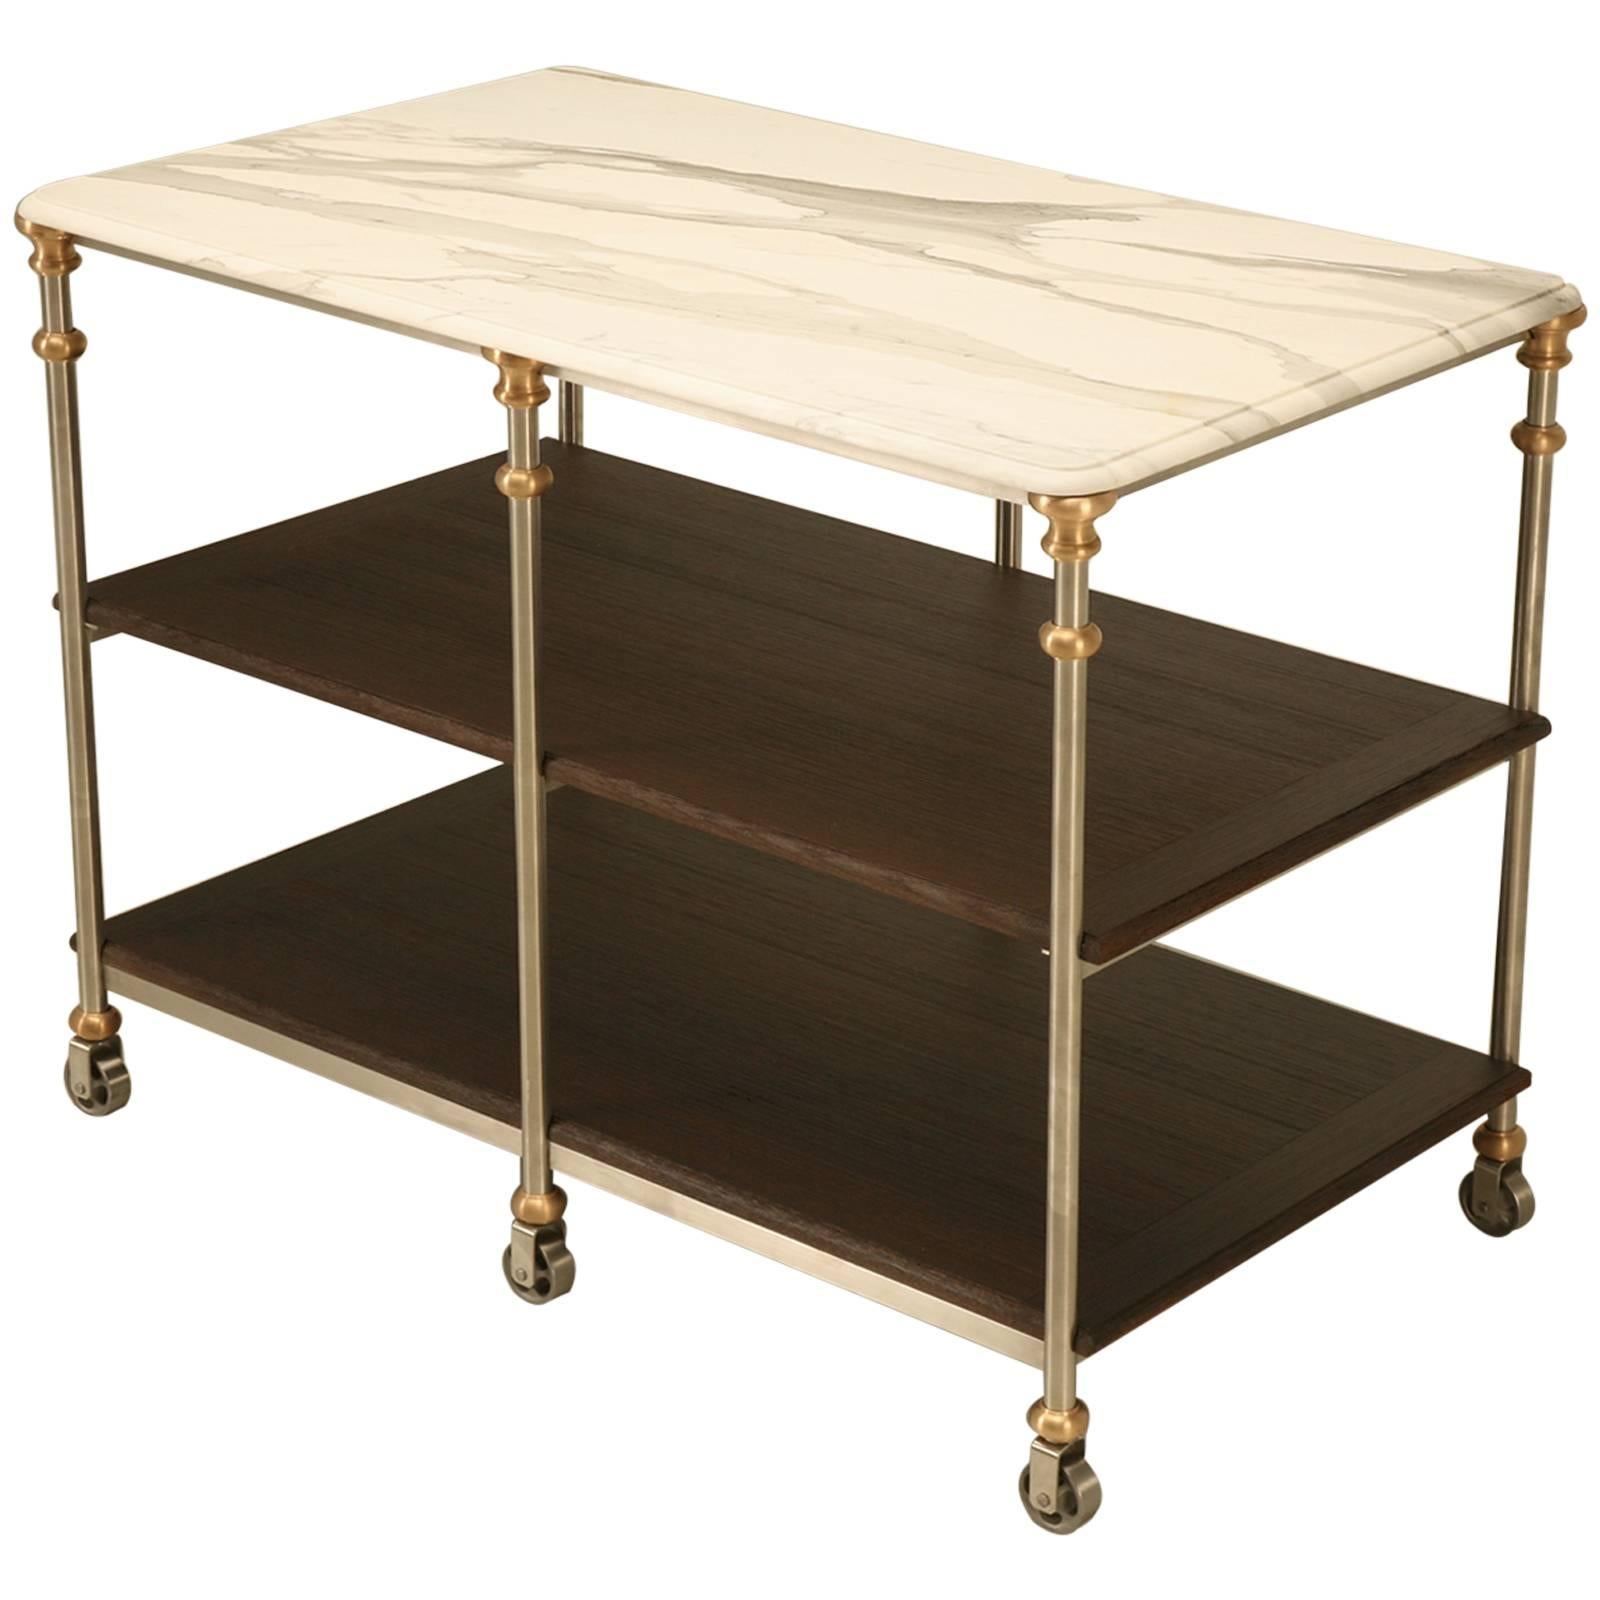 French Industrial Inspired Stainless Steel and Bronze Kitchen Island Any Size